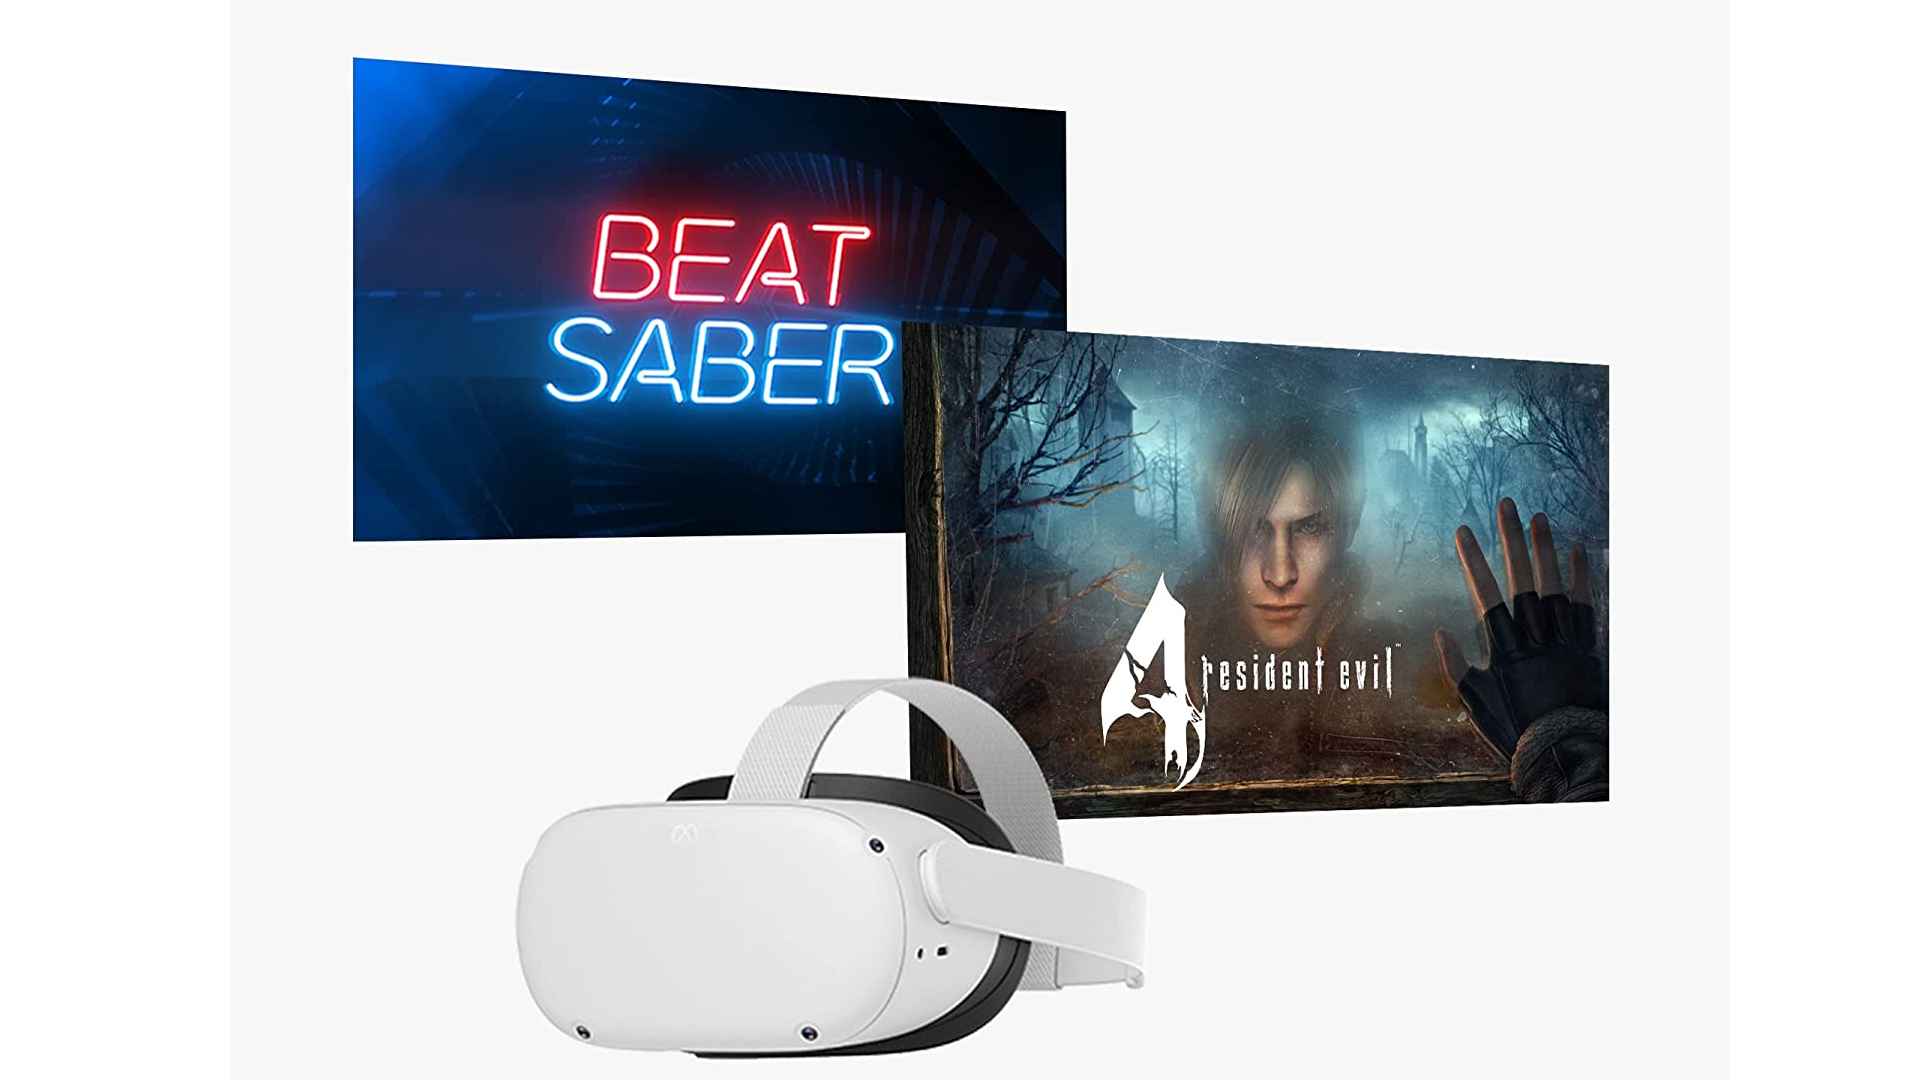 Image for Save £50 on a Meta Quest 2 bundle with Resident Evil 4 and Beat Saber this Cyber Monday